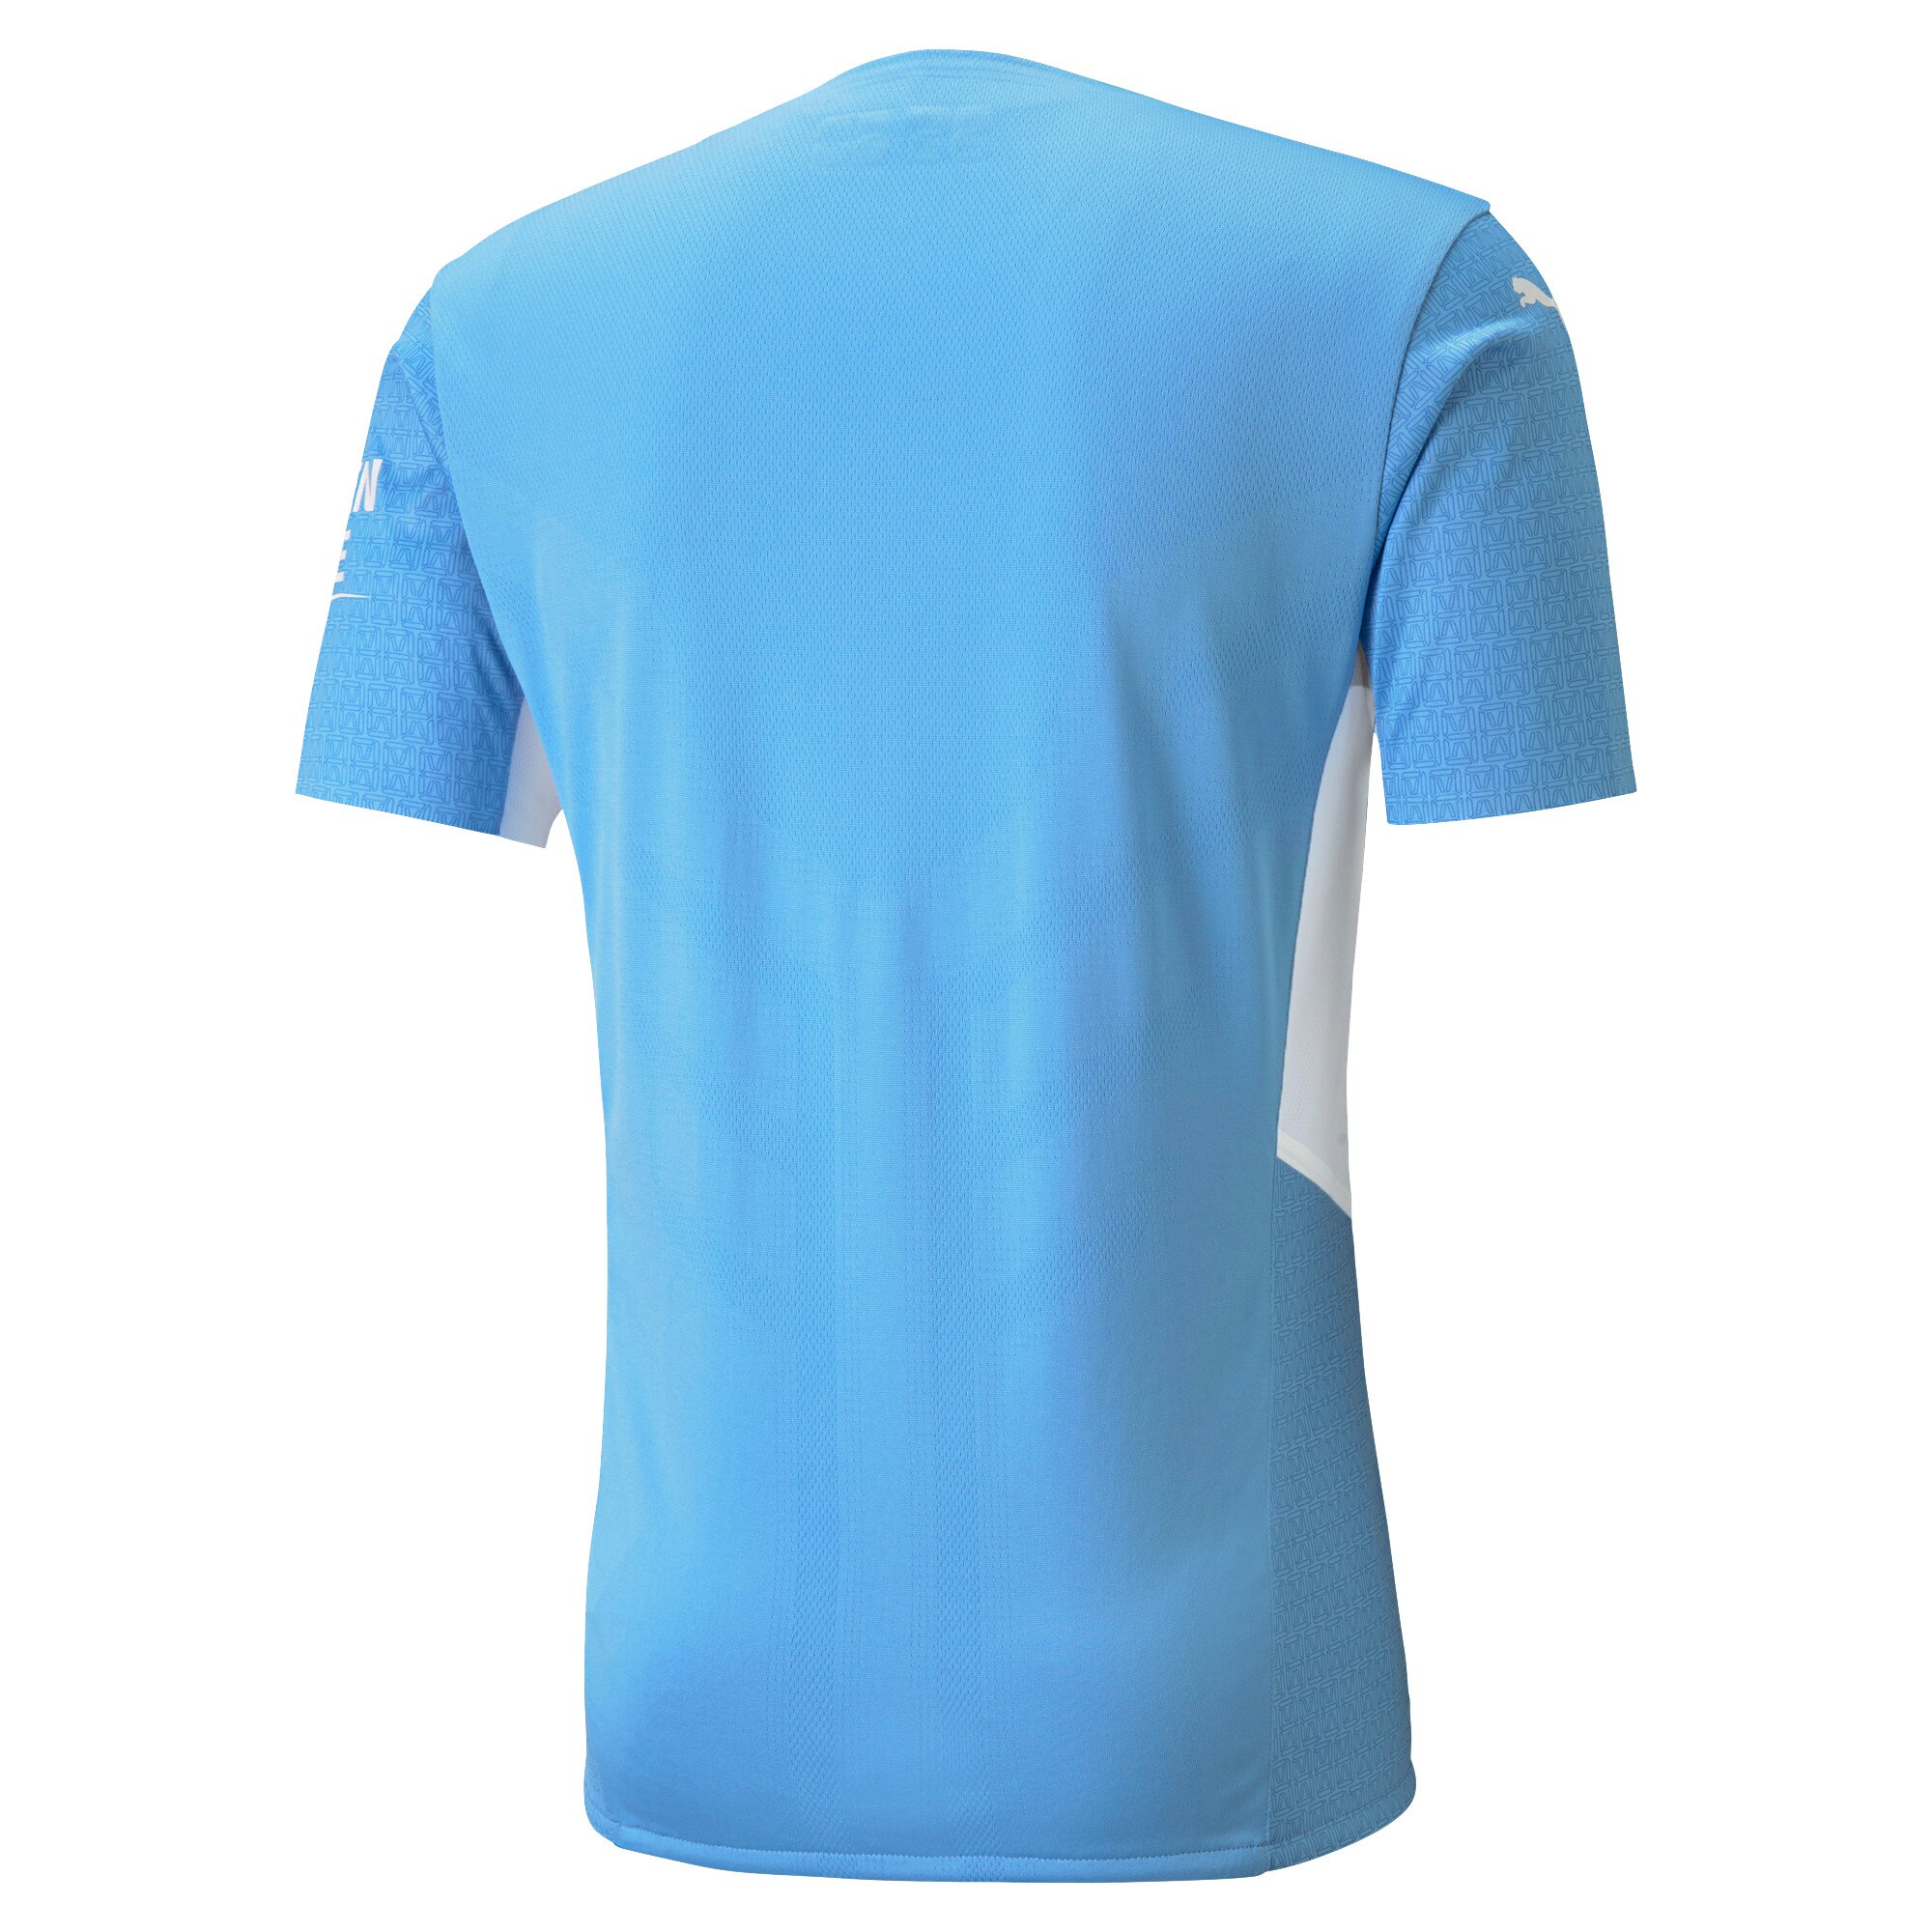 Manchester City Authentic Home Shirt 2021-22